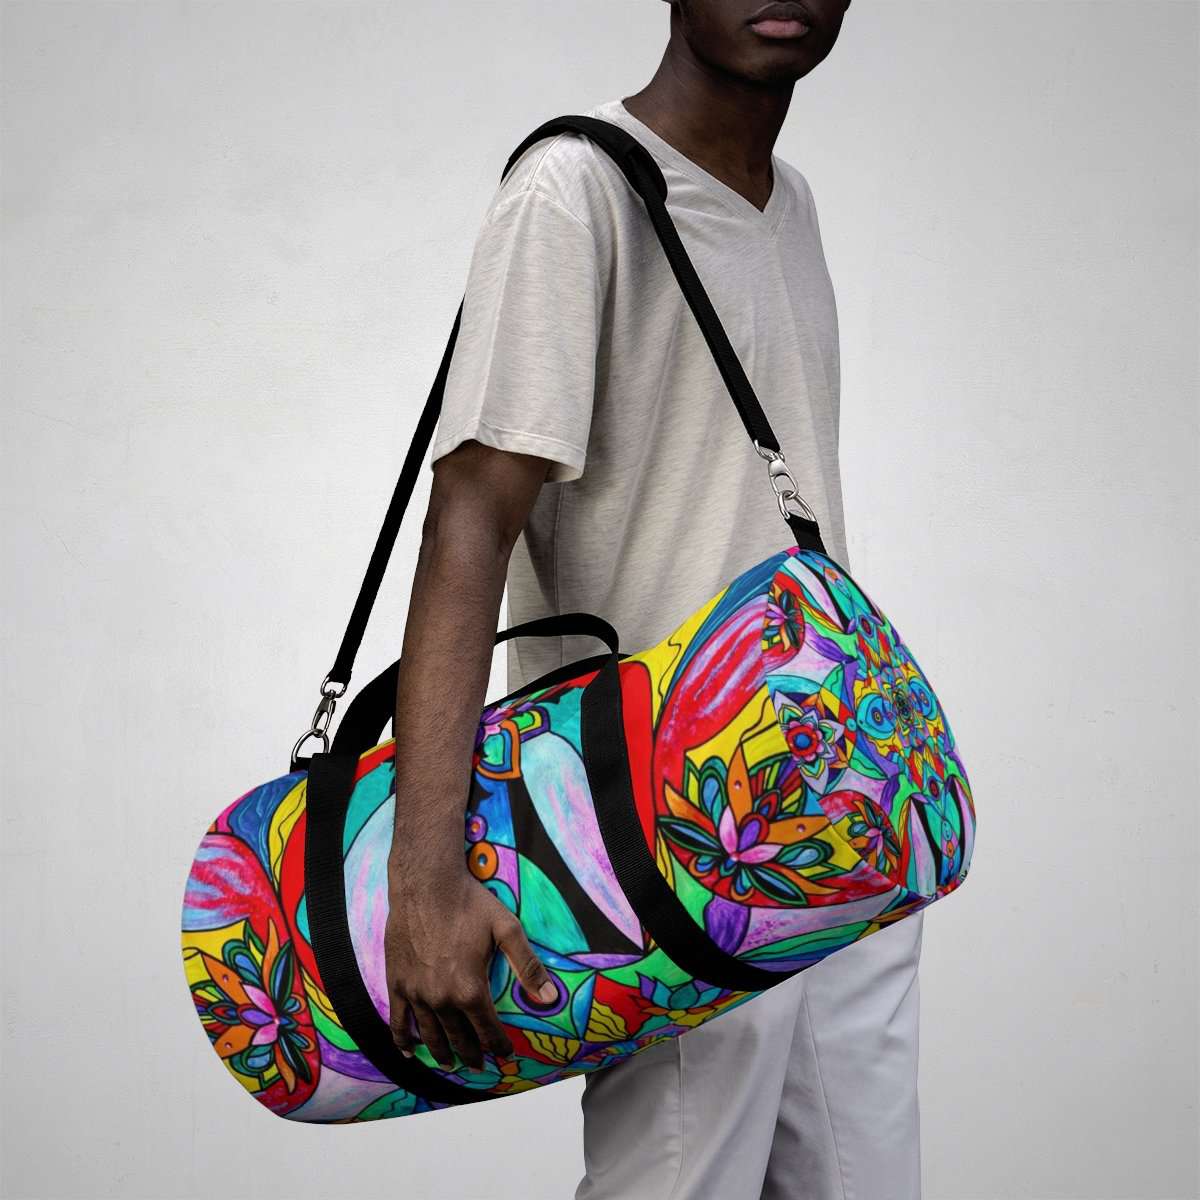 a-place-to-buy-receive-duffle-bag-online-now_11.jpg